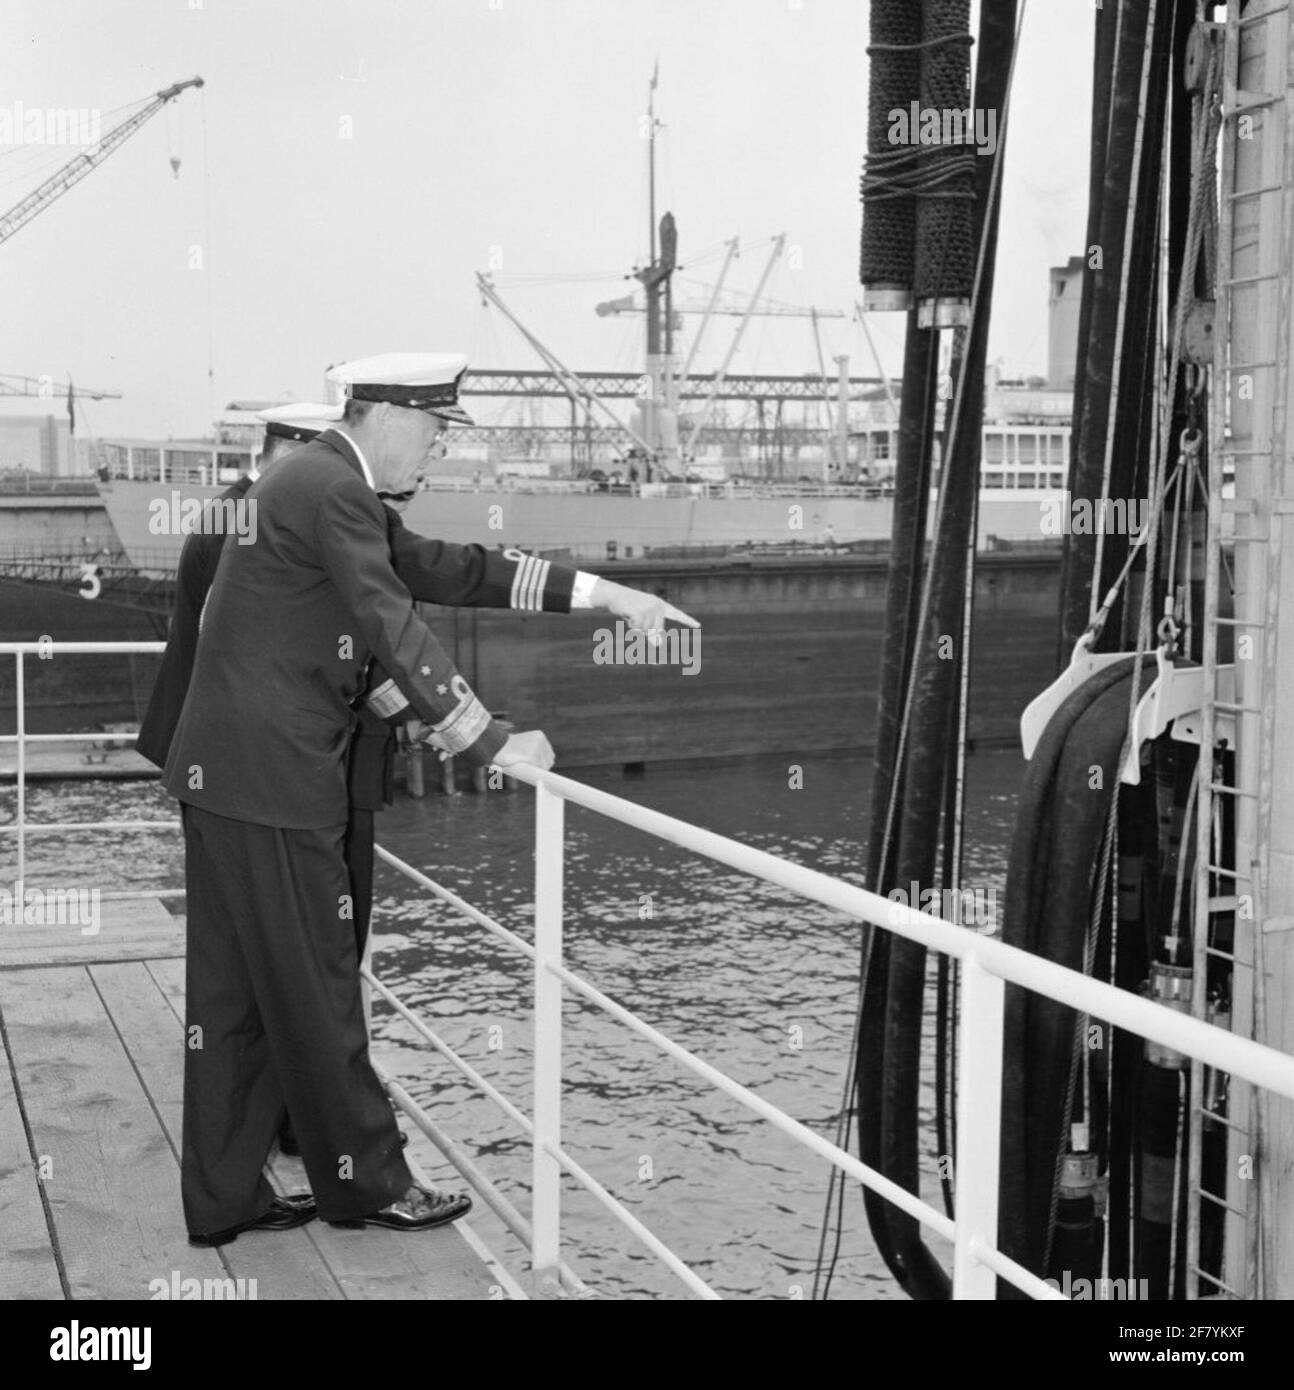 Prince Bernhard, in his position as Inspector General of the Armed Forces (IGK) and in the Uniform of Lieutenant Admiral (LTADM), visit the Rotterdamsche Droogdok Maatschappij (RDM) at the Heijplaat in Rotterdam. The seven provinces (Zipprov) (C 802) and the pool star (A 835), the supply ship for the Royal Netherlands Marine (KM), which after the commissioning as Harer Majesteits (Hr.Ms.) will go into the pool star. On board the pool star. Stock Photo